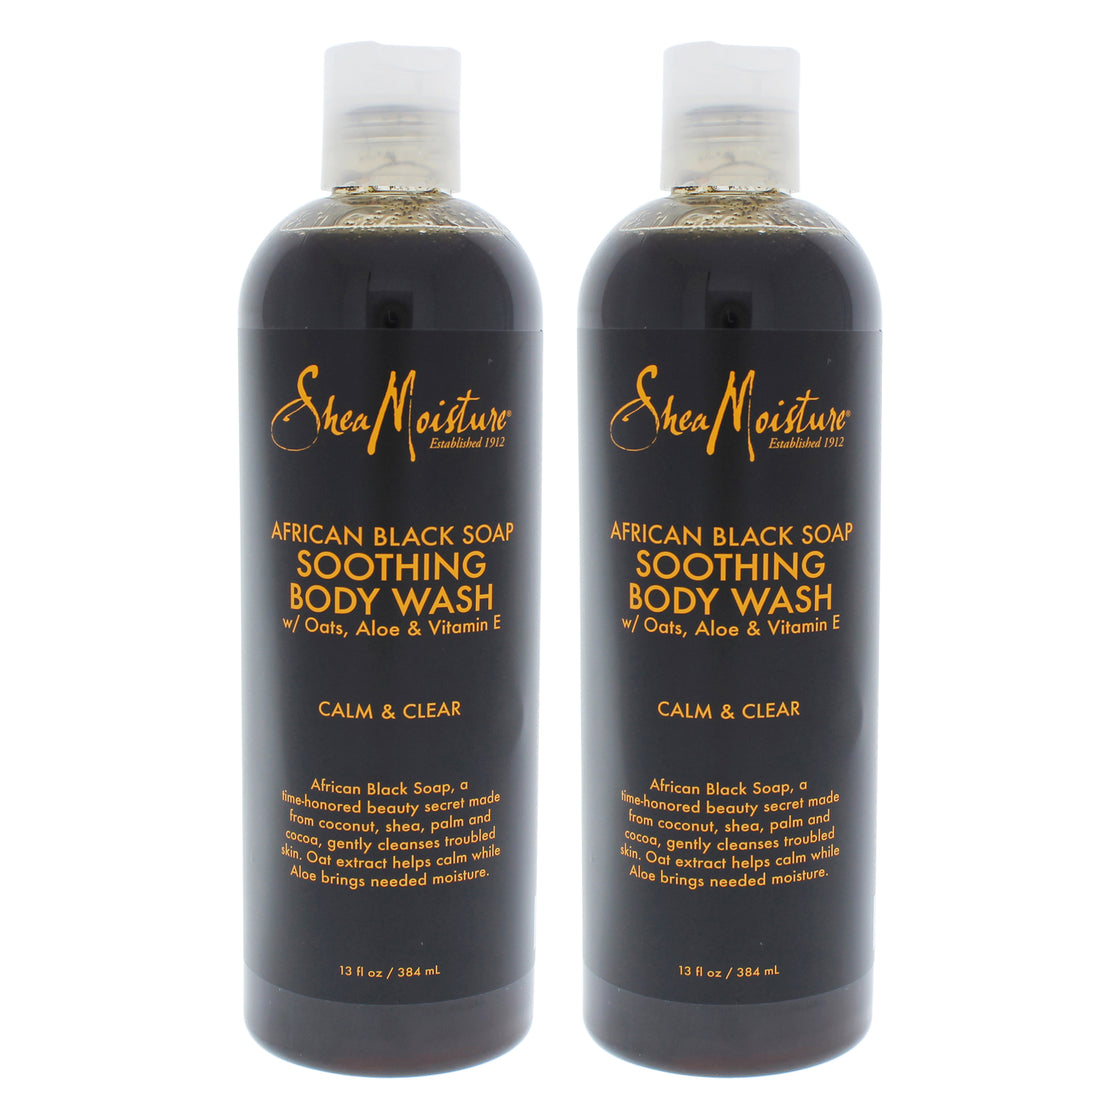 African Black Soap Soothing Body Wash - Pack of 2 by Shea Moisture for Unisex - 13 oz Body Wash